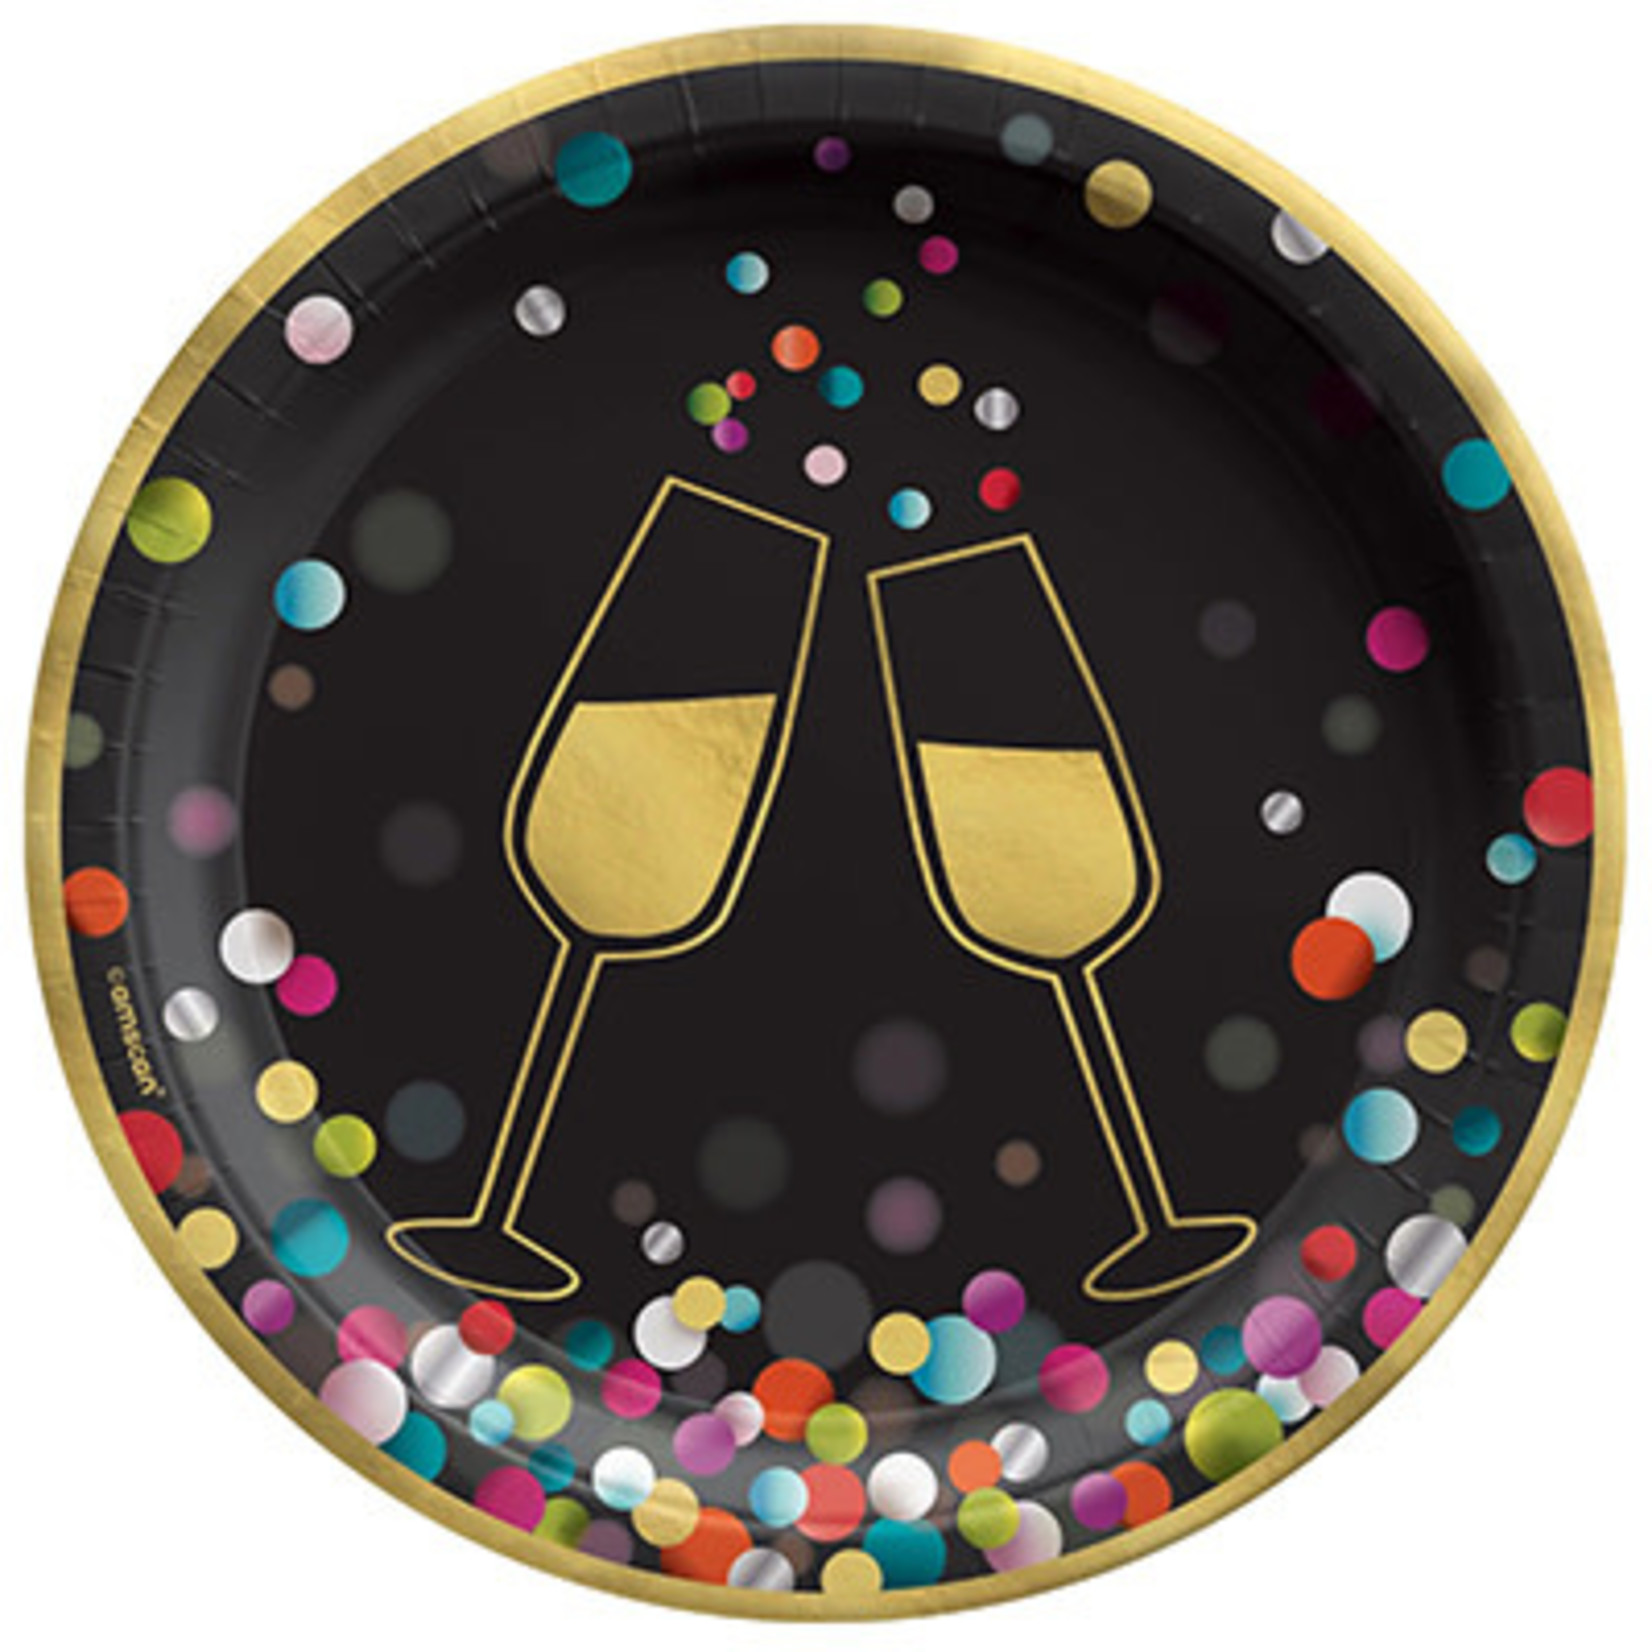 Amscan 7" New Year's Colorful Confetti Plates - 20ct.